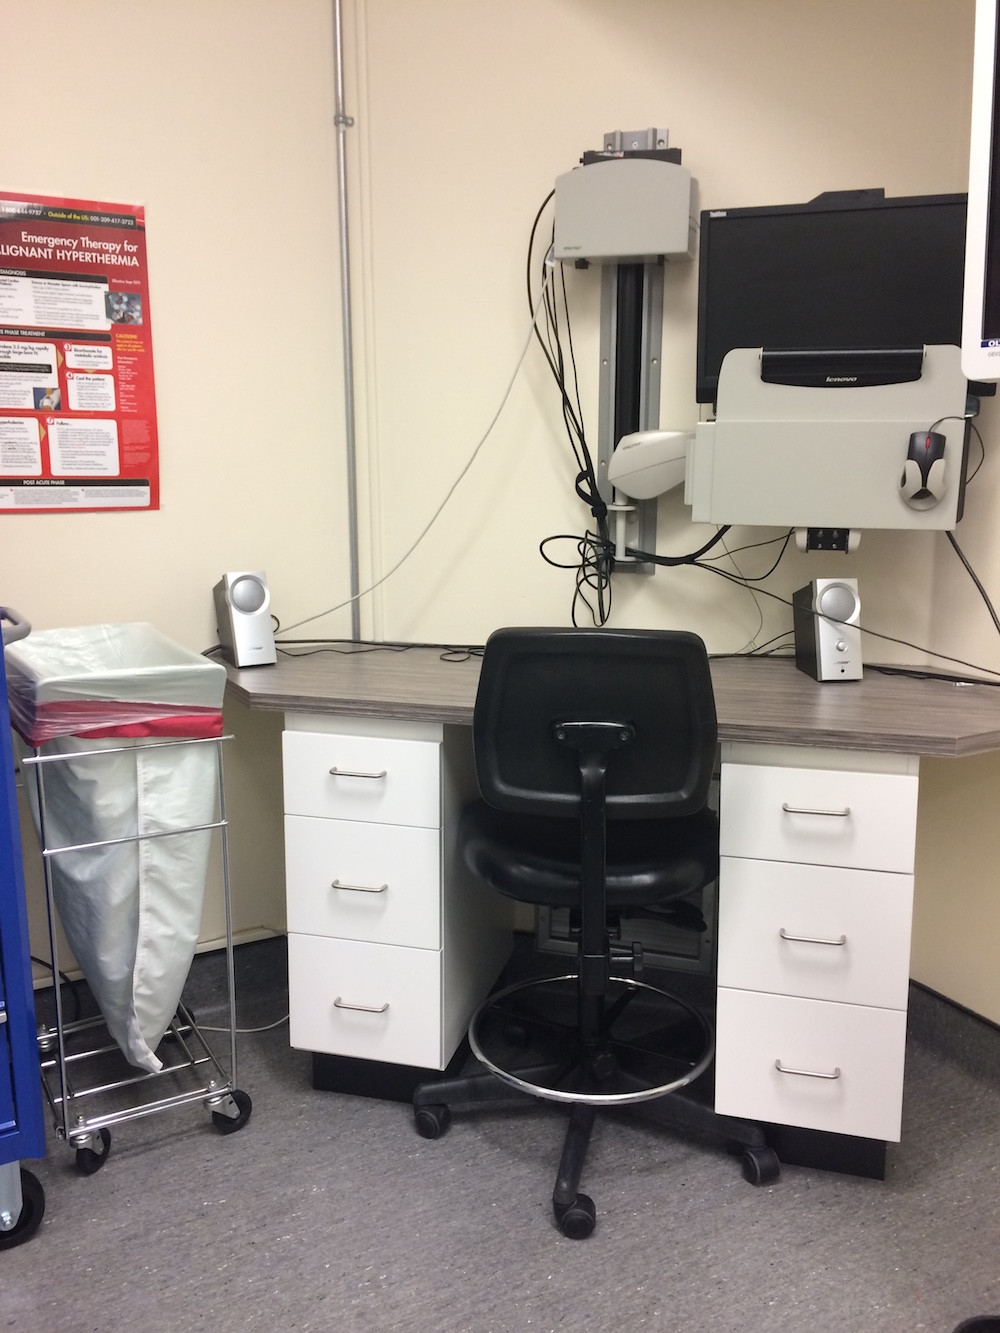 Tour - OR - New Anaesthetic Desk